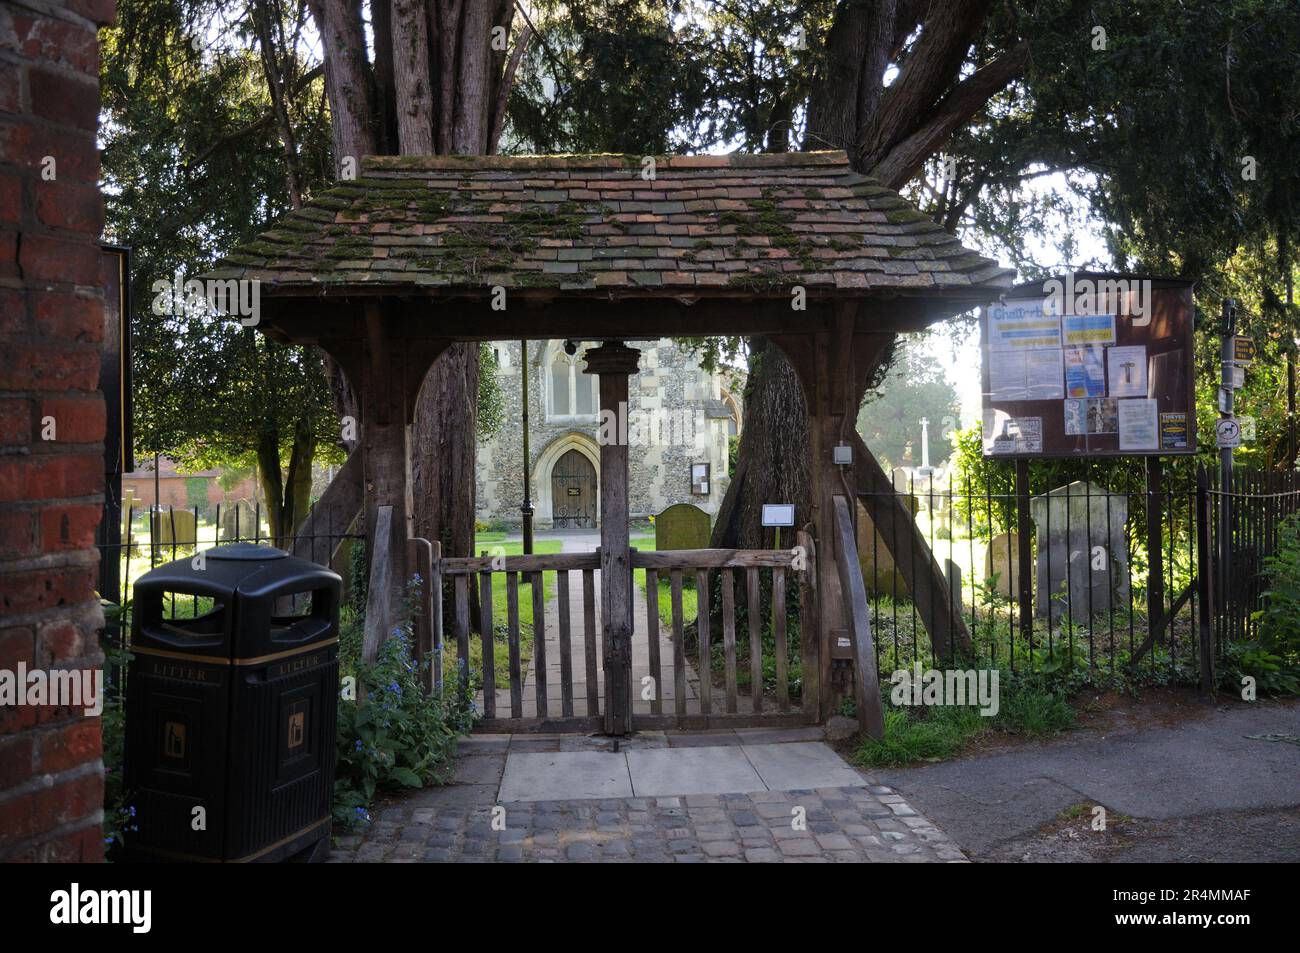 Lych gate, Chalfont St Giles, Buckinghamshire Foto Stock